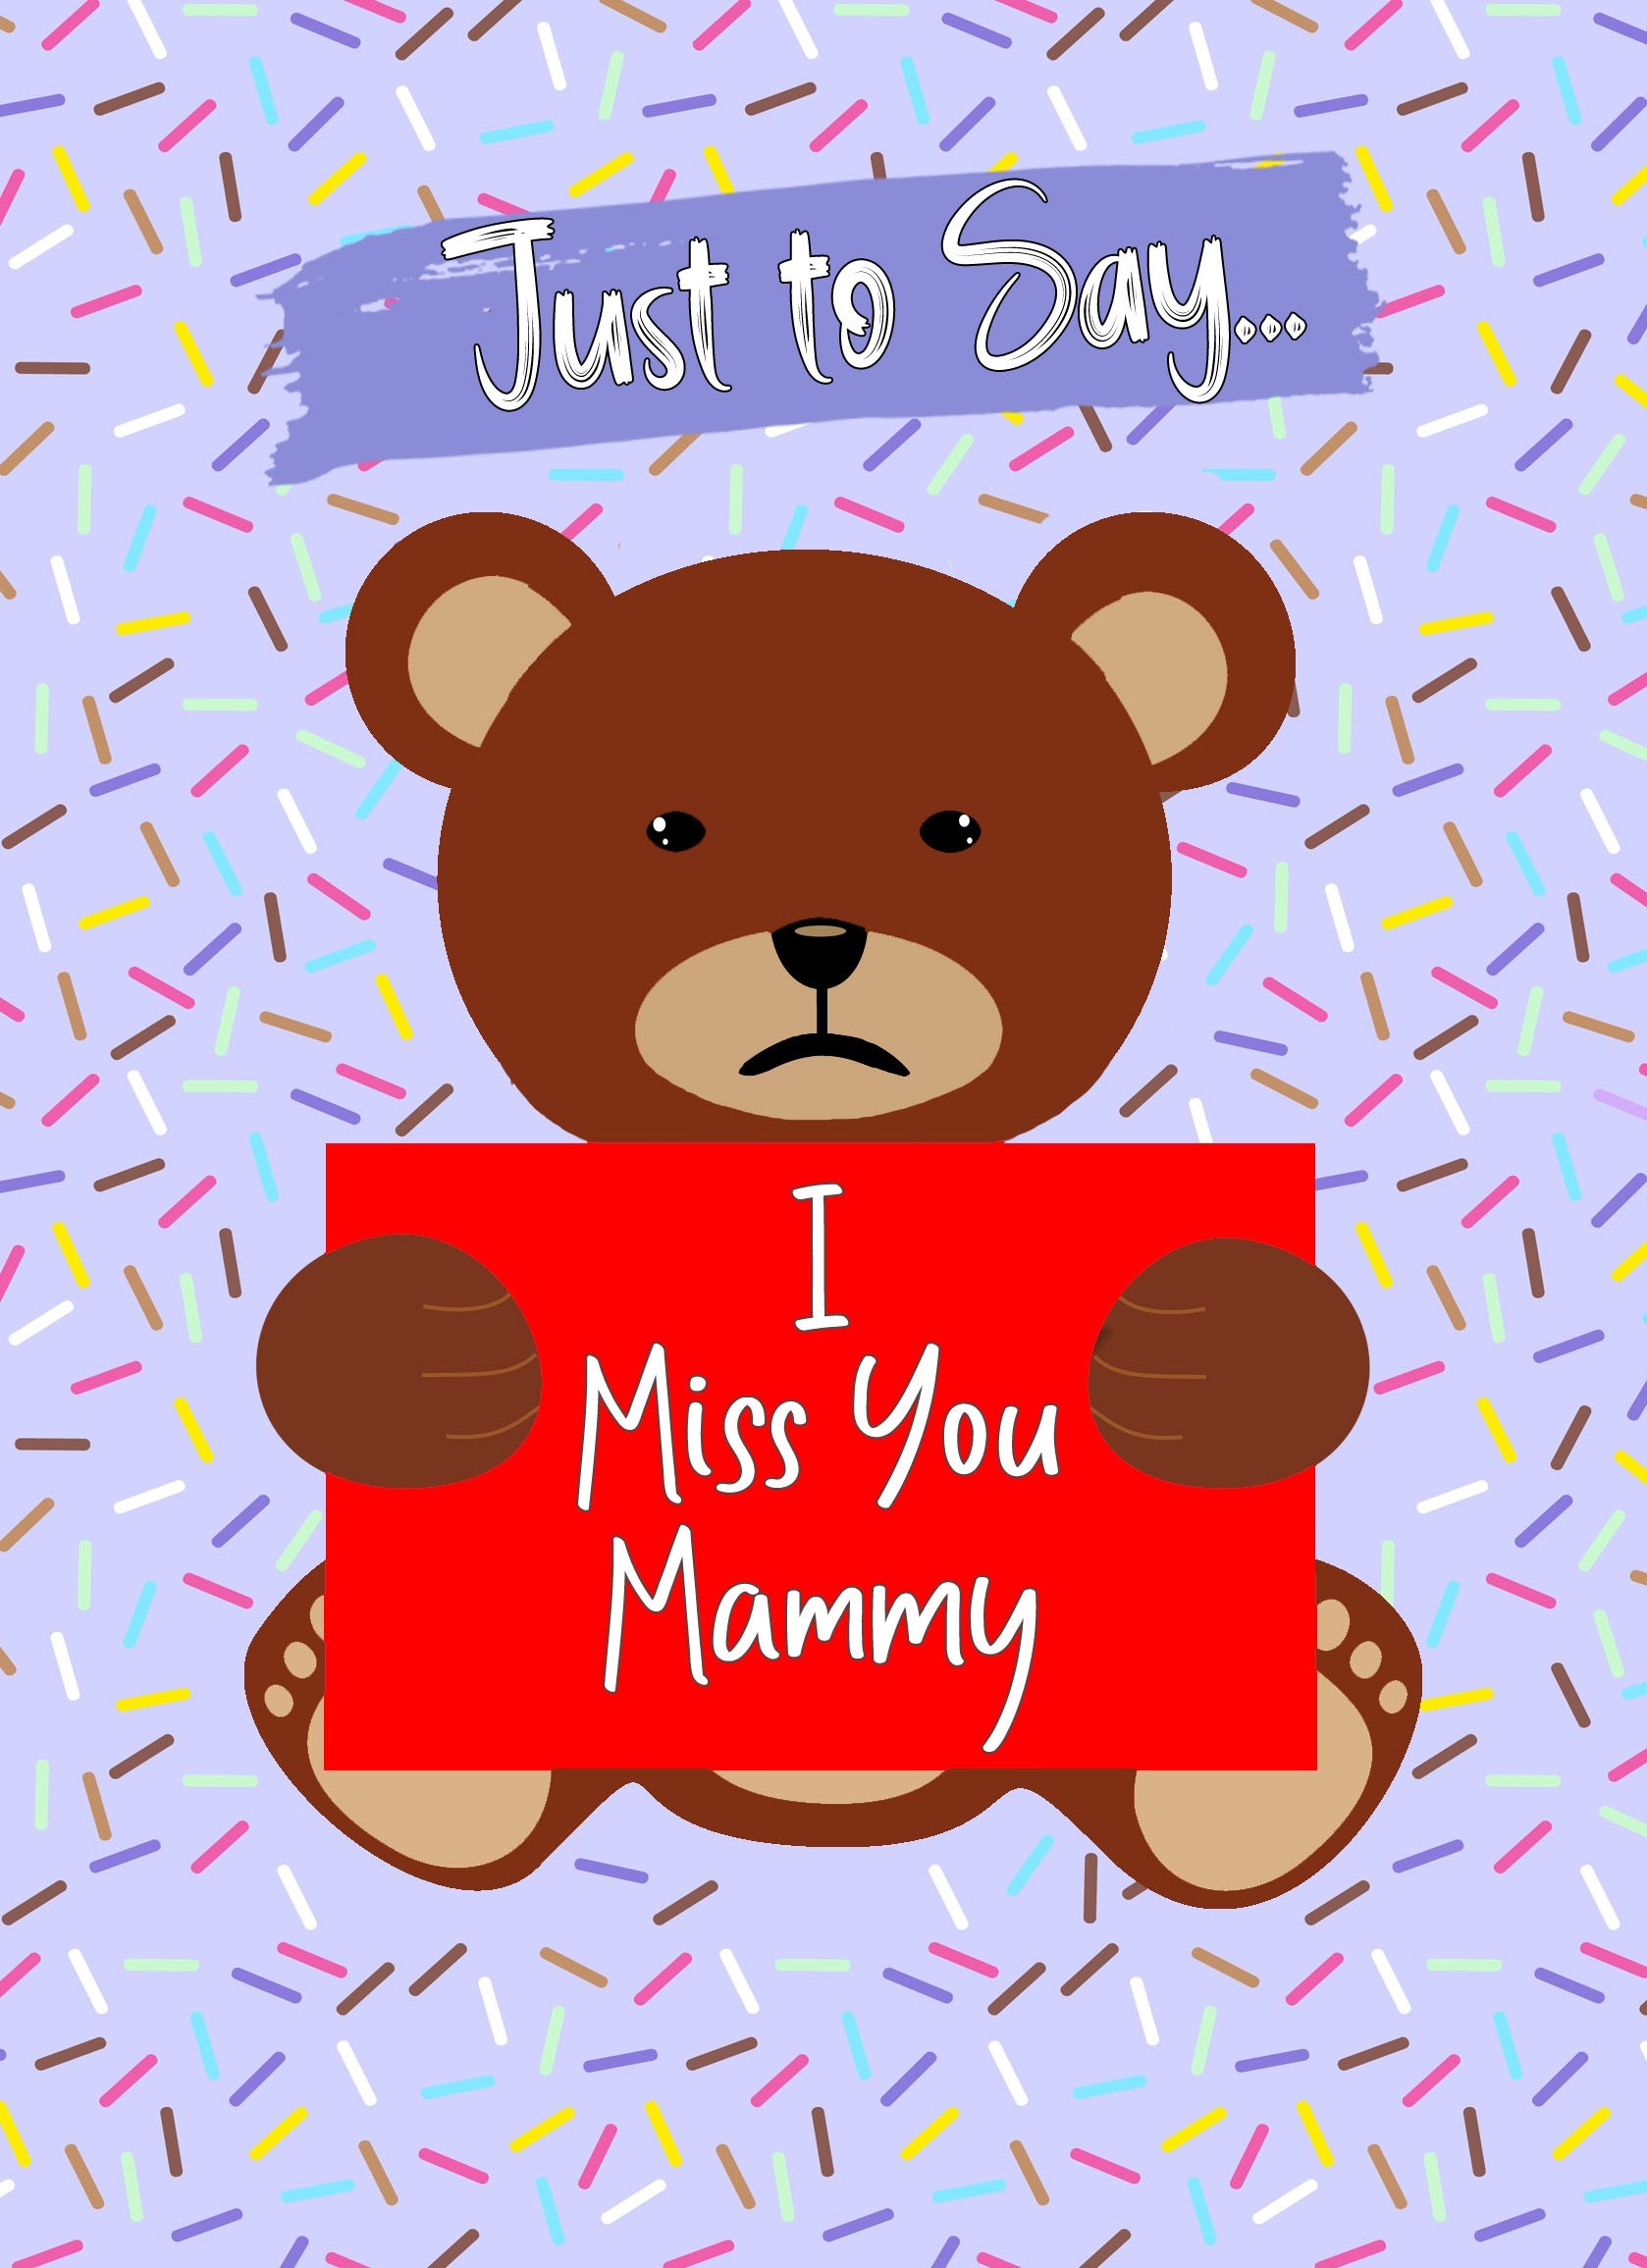 Missing You Card For Mammy (Bear)